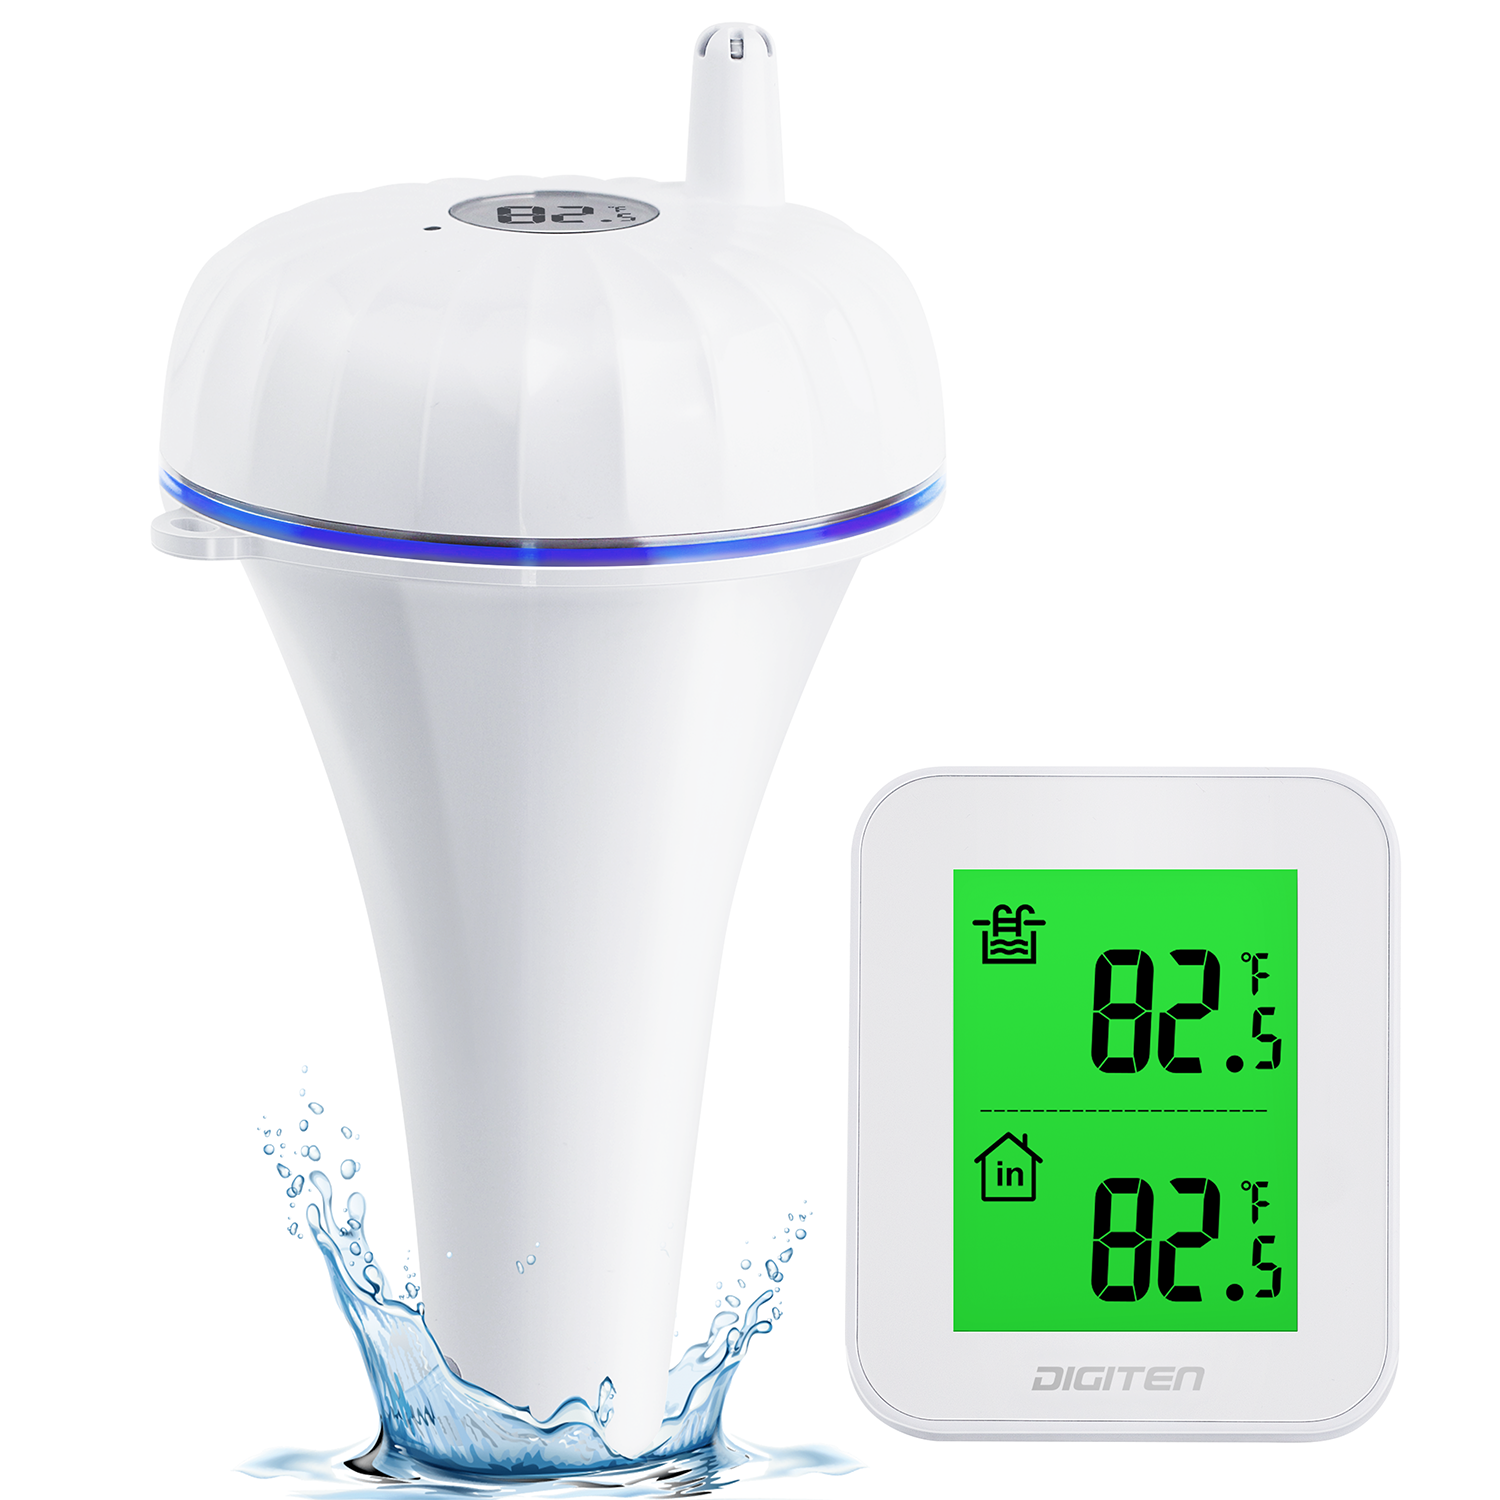 Bluetooth-compatible Thermometer Lcd Digital Temperature Sensor Humidity  Meter Indoor Hygrometer Me